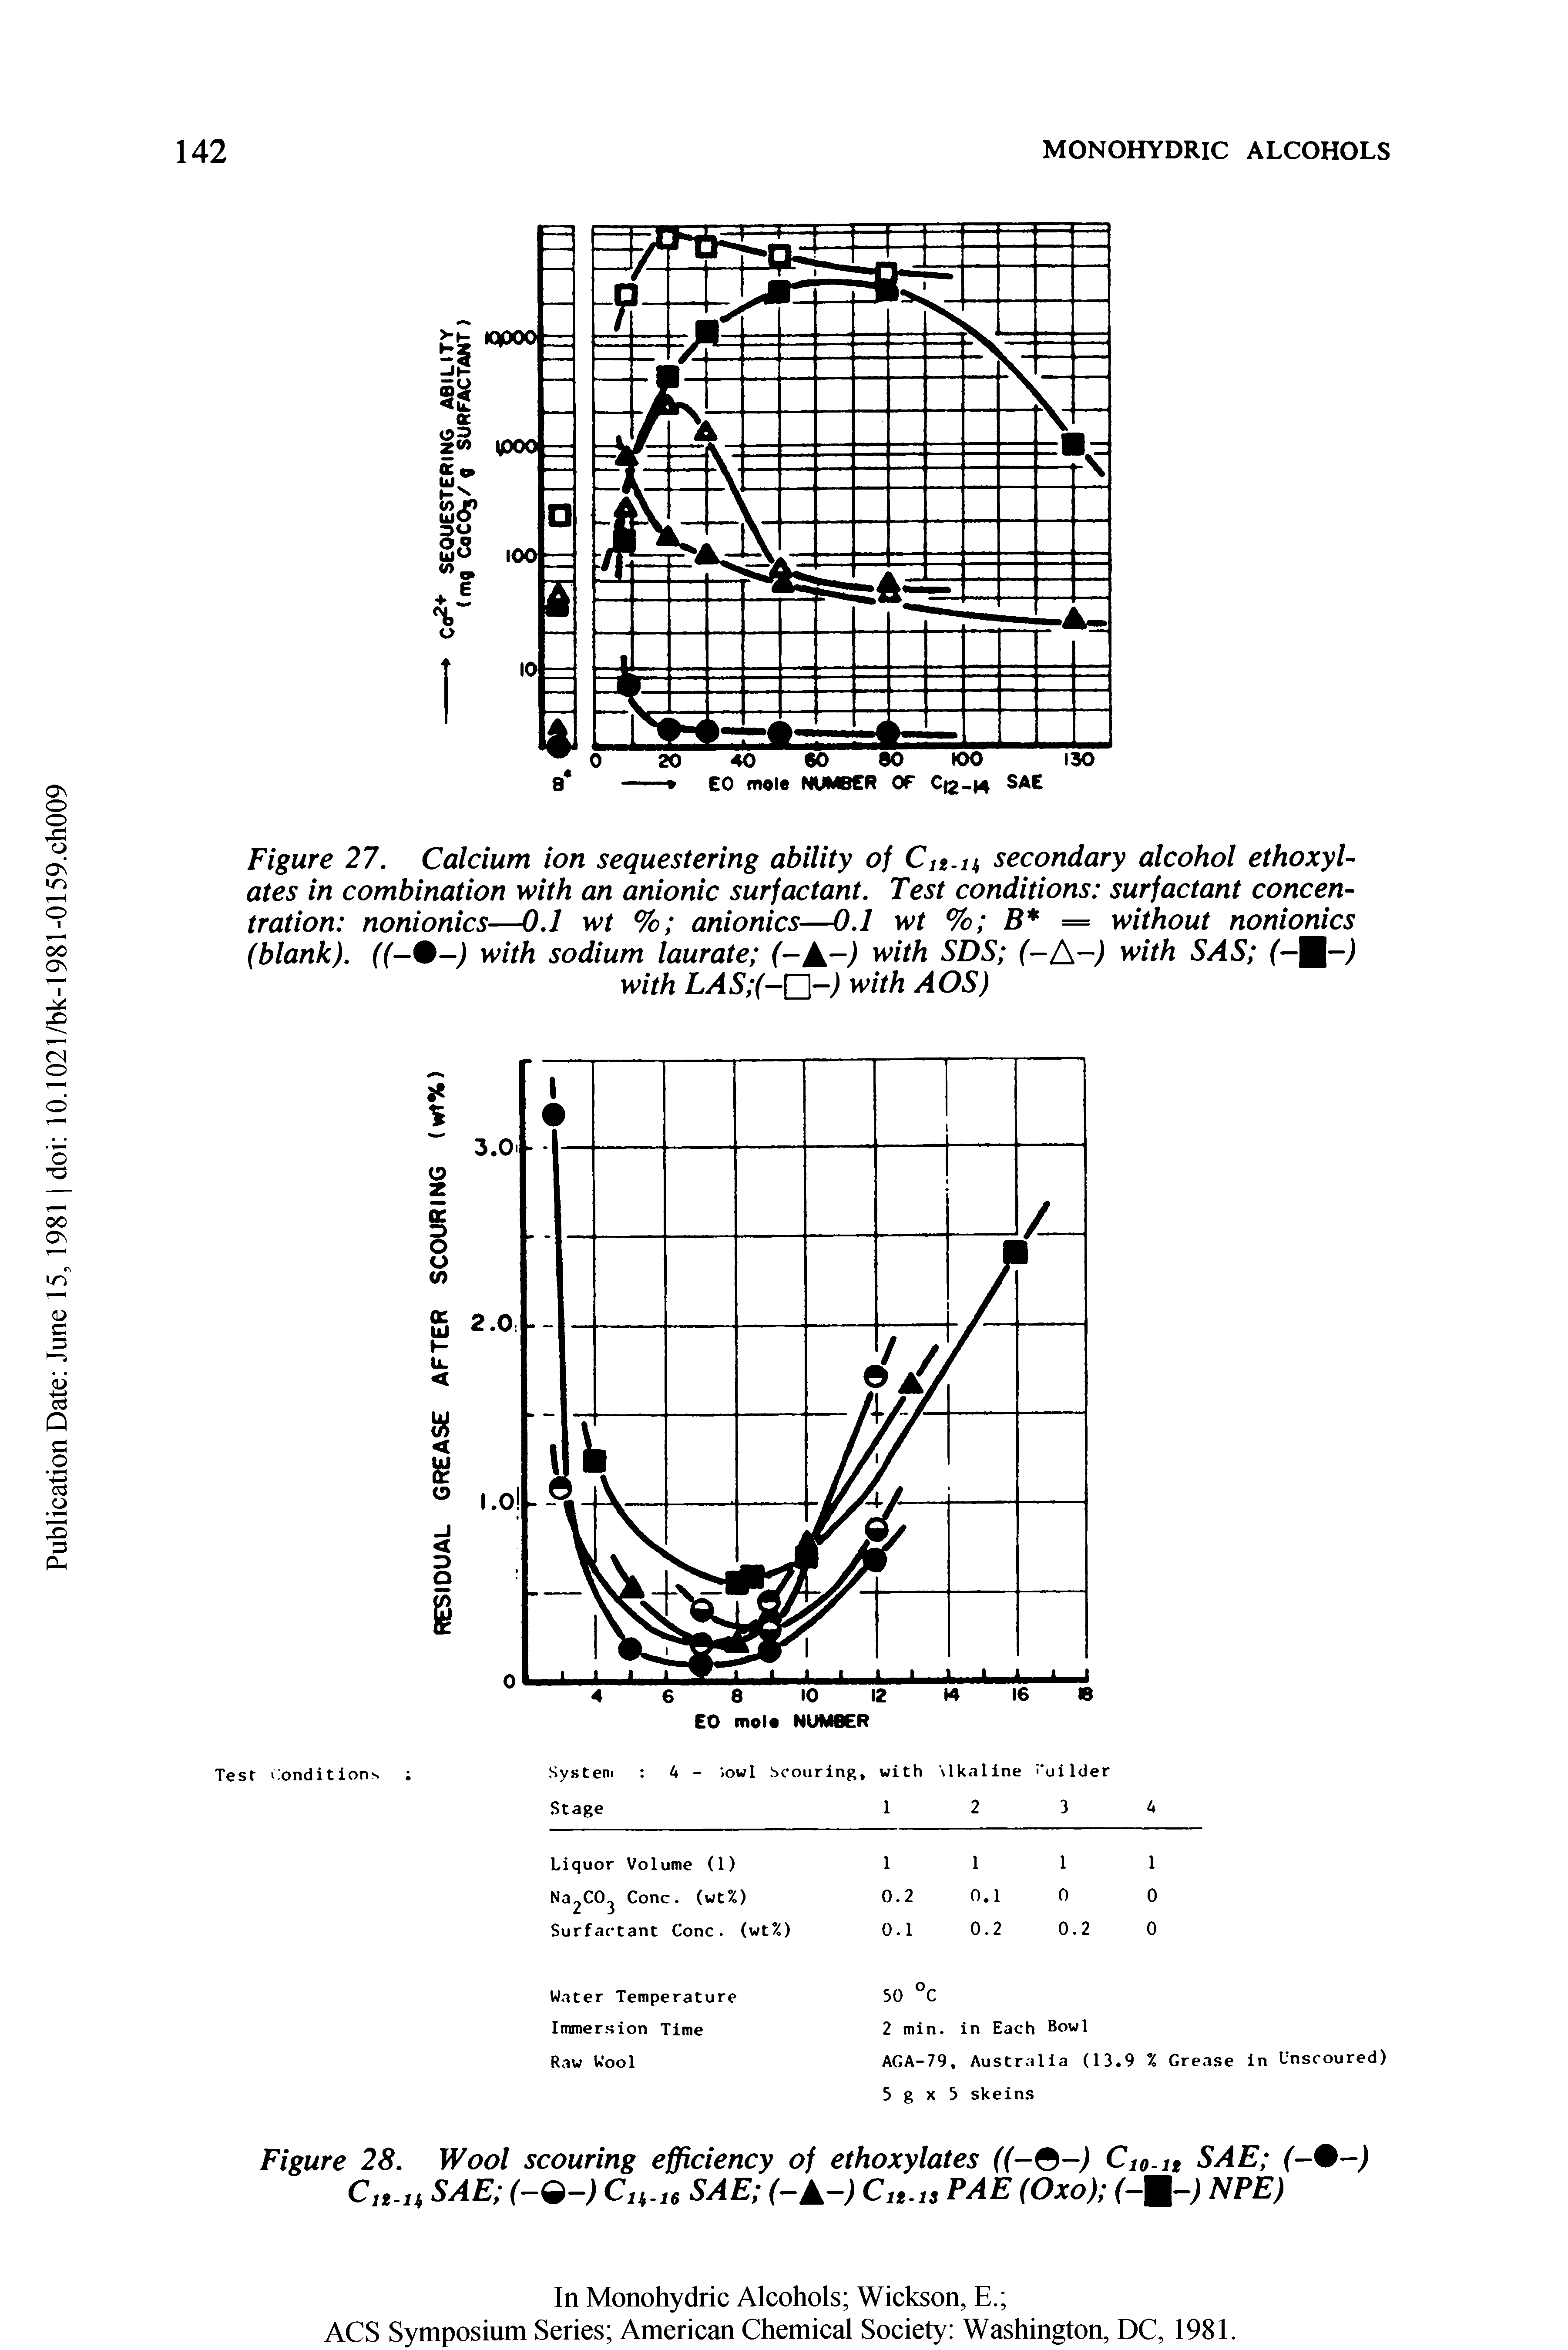 Figure 27. Calcium ion sequestering ability of Cn-n secondary alcohol ethoxyl-ates in combination with an anionic surfactant. Test conditions surfactant concentration nonionics—0.1 wt % anionics—0.1 wt % B = without nonionics (blank). ((-%-) with sodium laurate ( A ) with SDS (-A-) with SAS ( M ) with LAS (- A ) with AOS)...